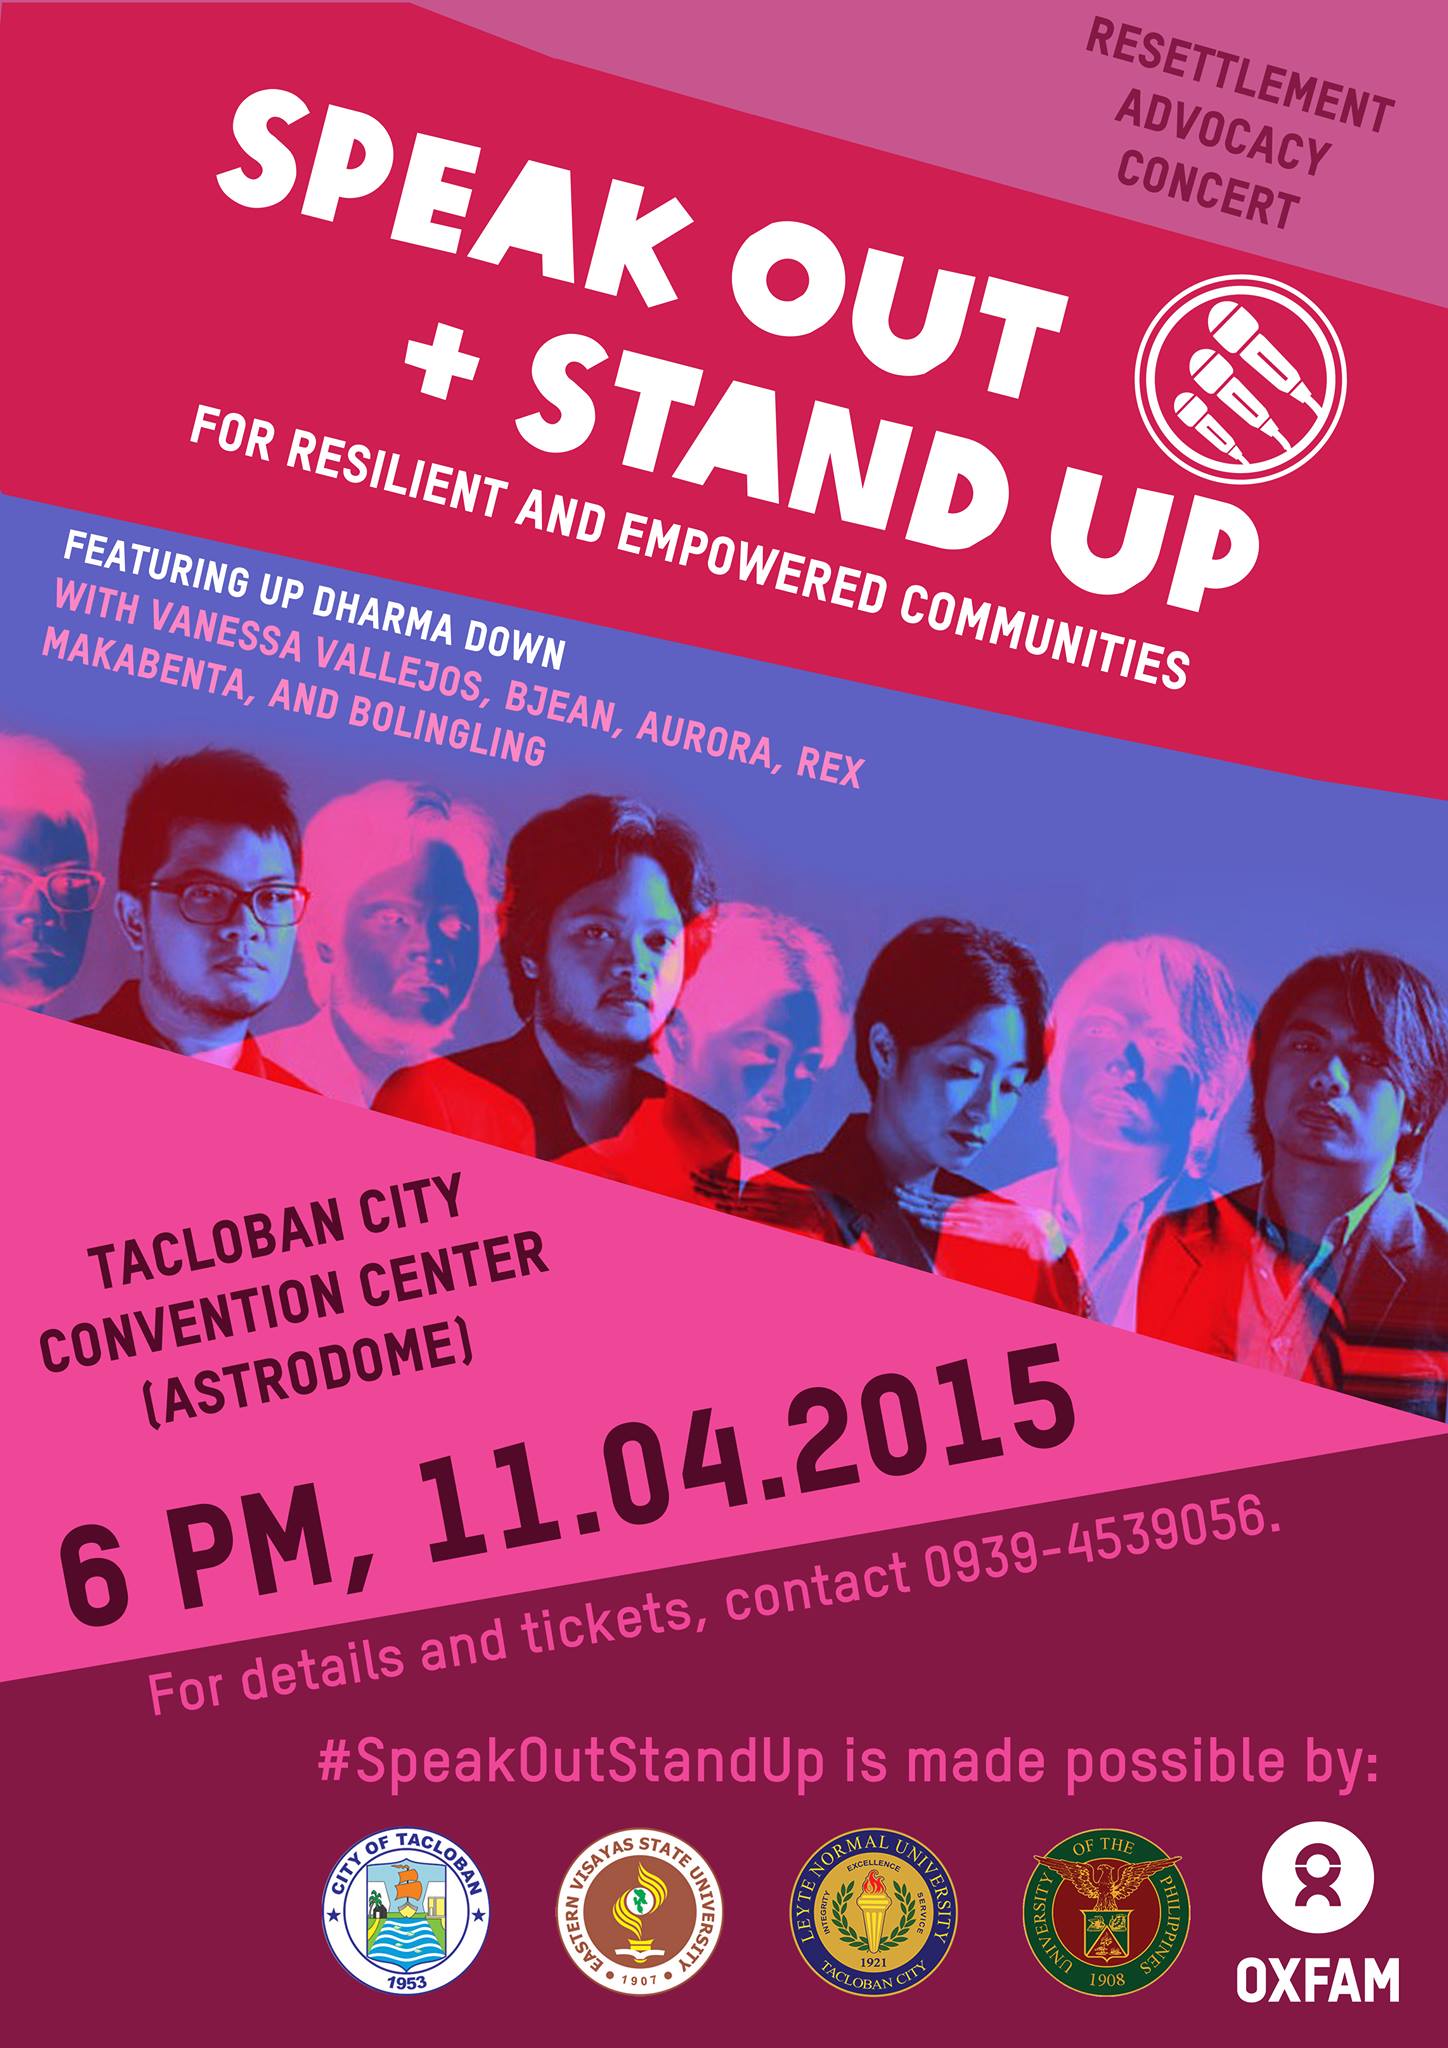 Oxfam sa Pilipinas OxJAM with us! Our team in Tacloban will be holding the #SpeakOutStandUp resettlement advocacy concert, to be staged at the Tacloban City Convention Center. See you there! — with Up Dharma Down.